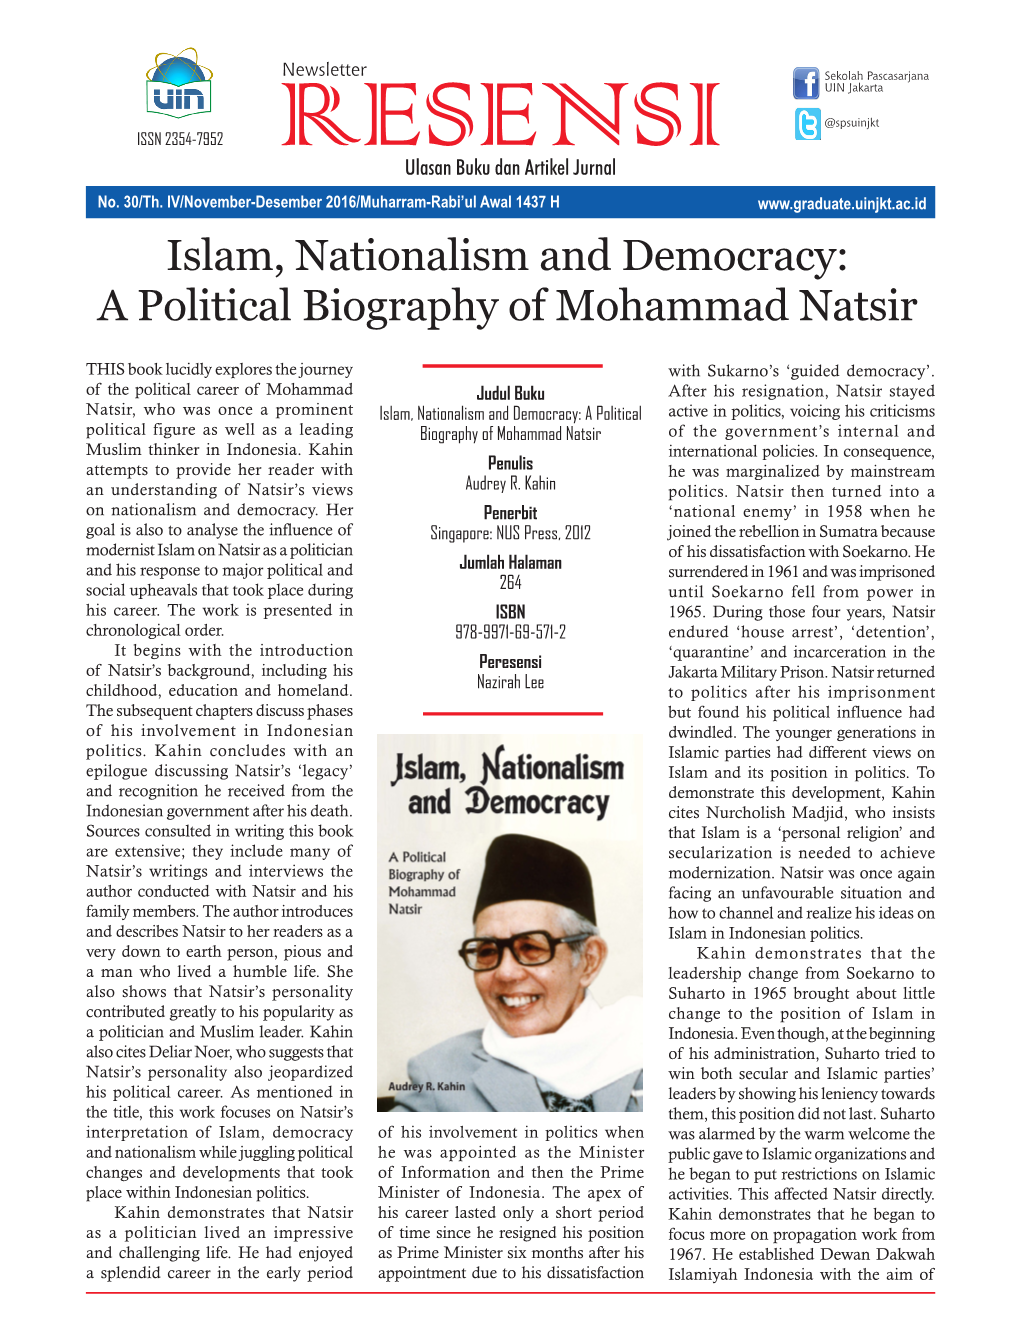 Islam, Nationalism and Democracy: a Political Biography of Mohammad Natsir